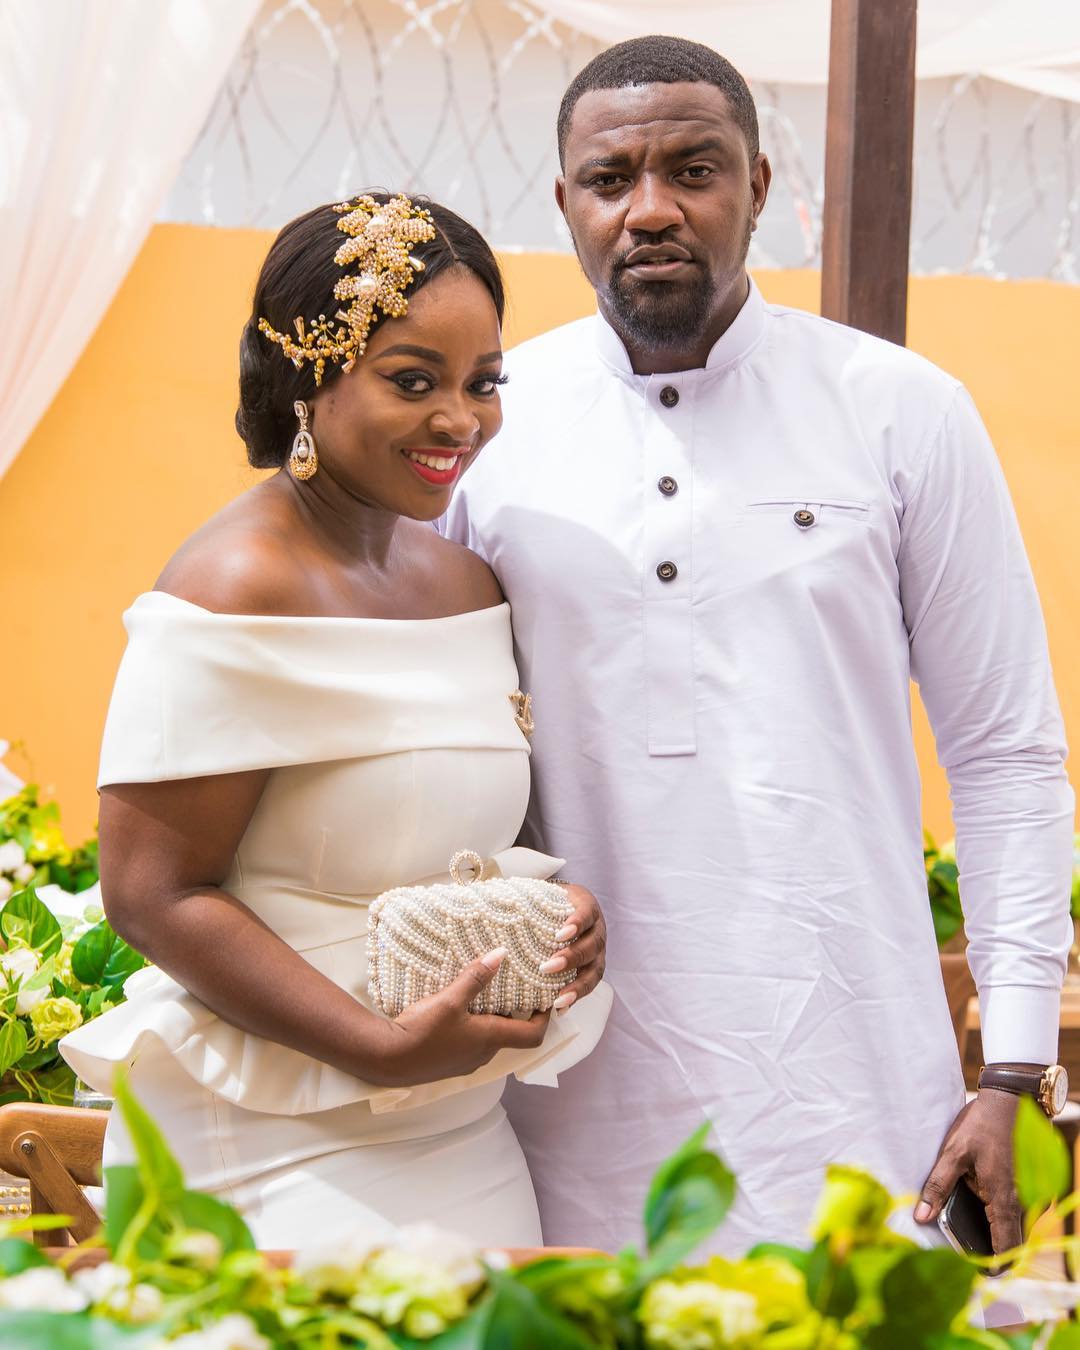 Frederick Nuamah And Martekor Private Engagement Ceremony (2)